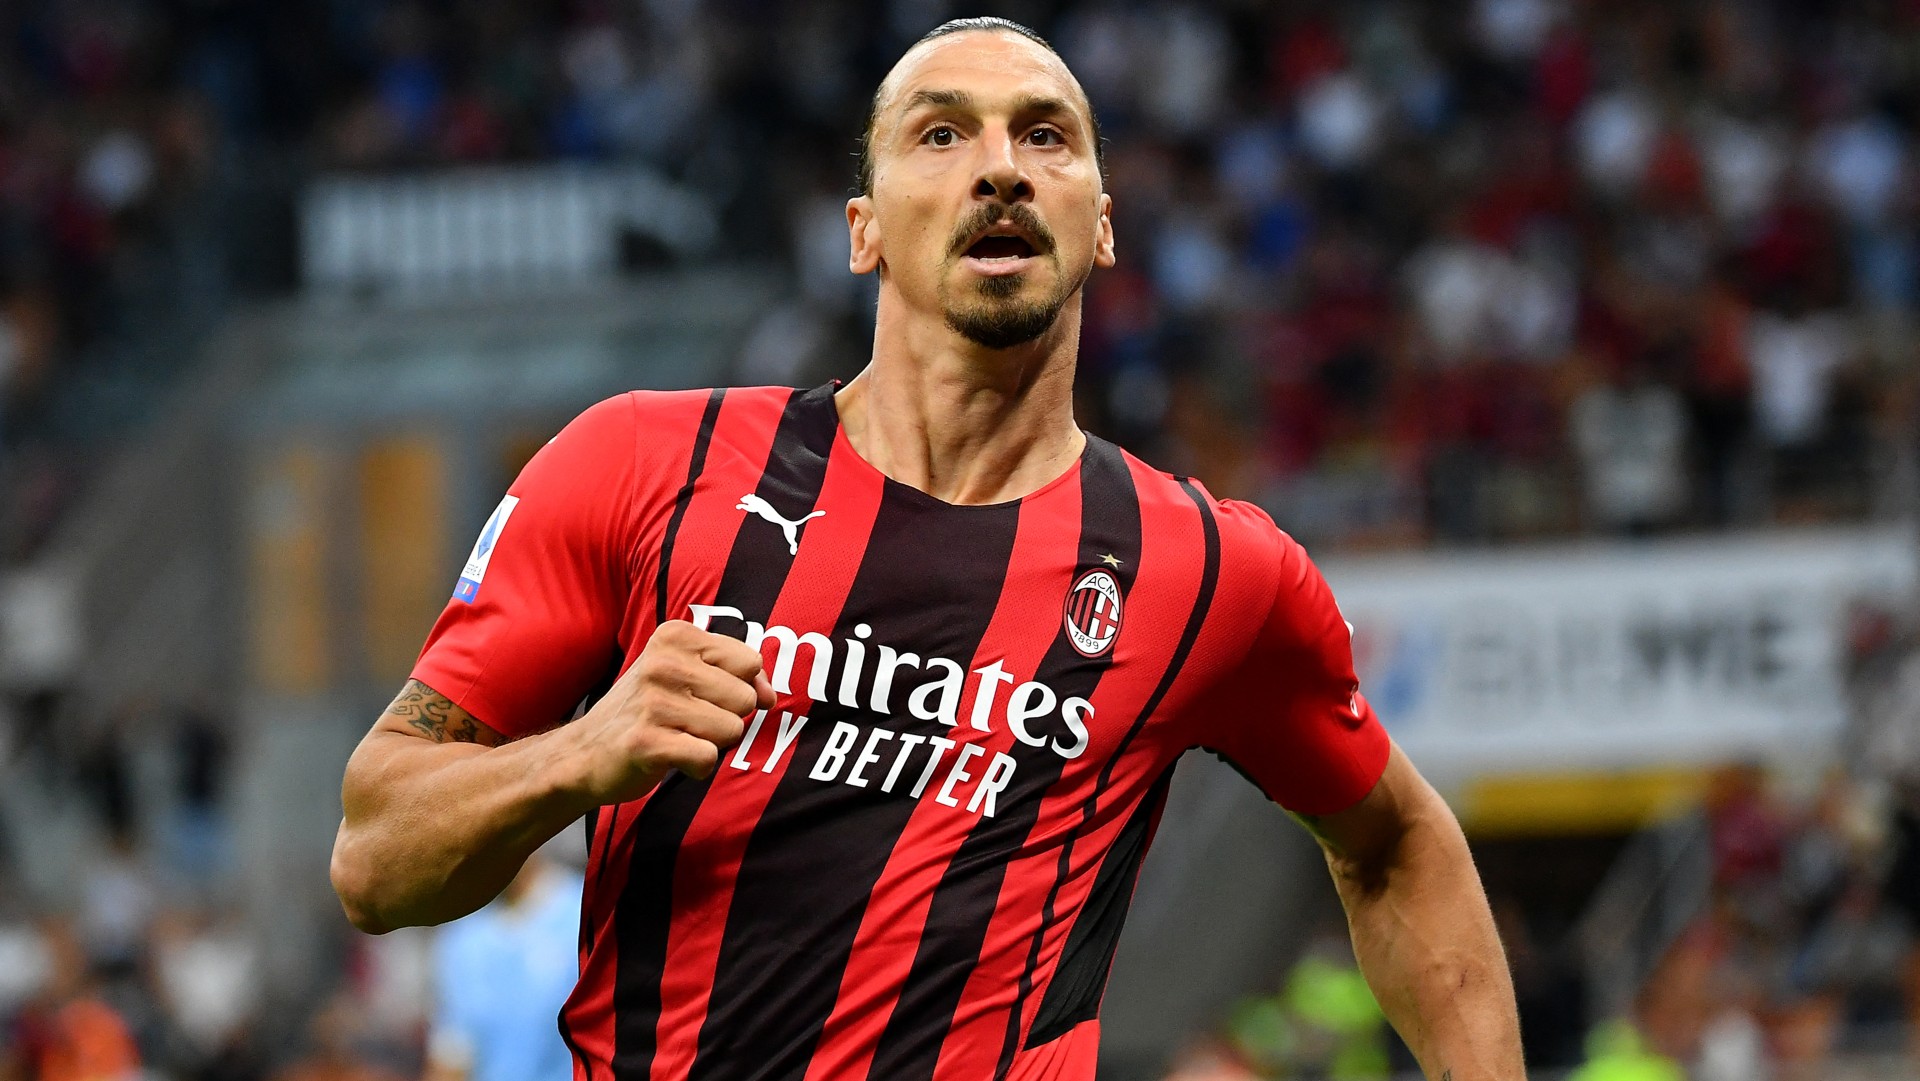 'I don’t want to stop until I am kicked out' - Ibrahimovic hints Milan may not be final club